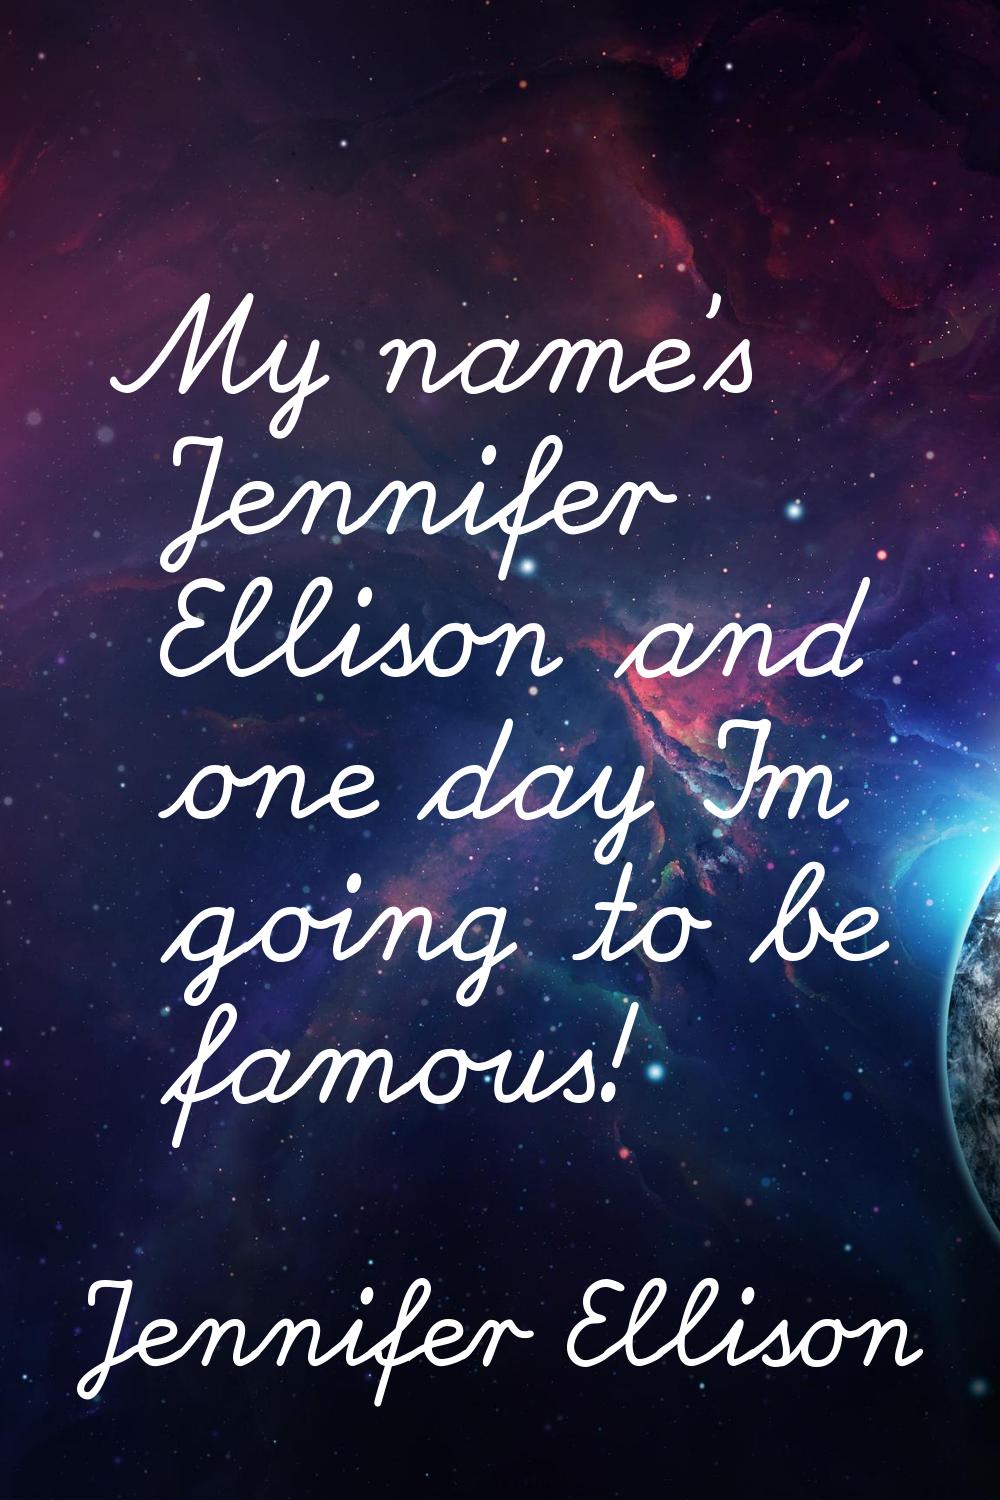 My name's Jennifer Ellison and one day I'm going to be famous!